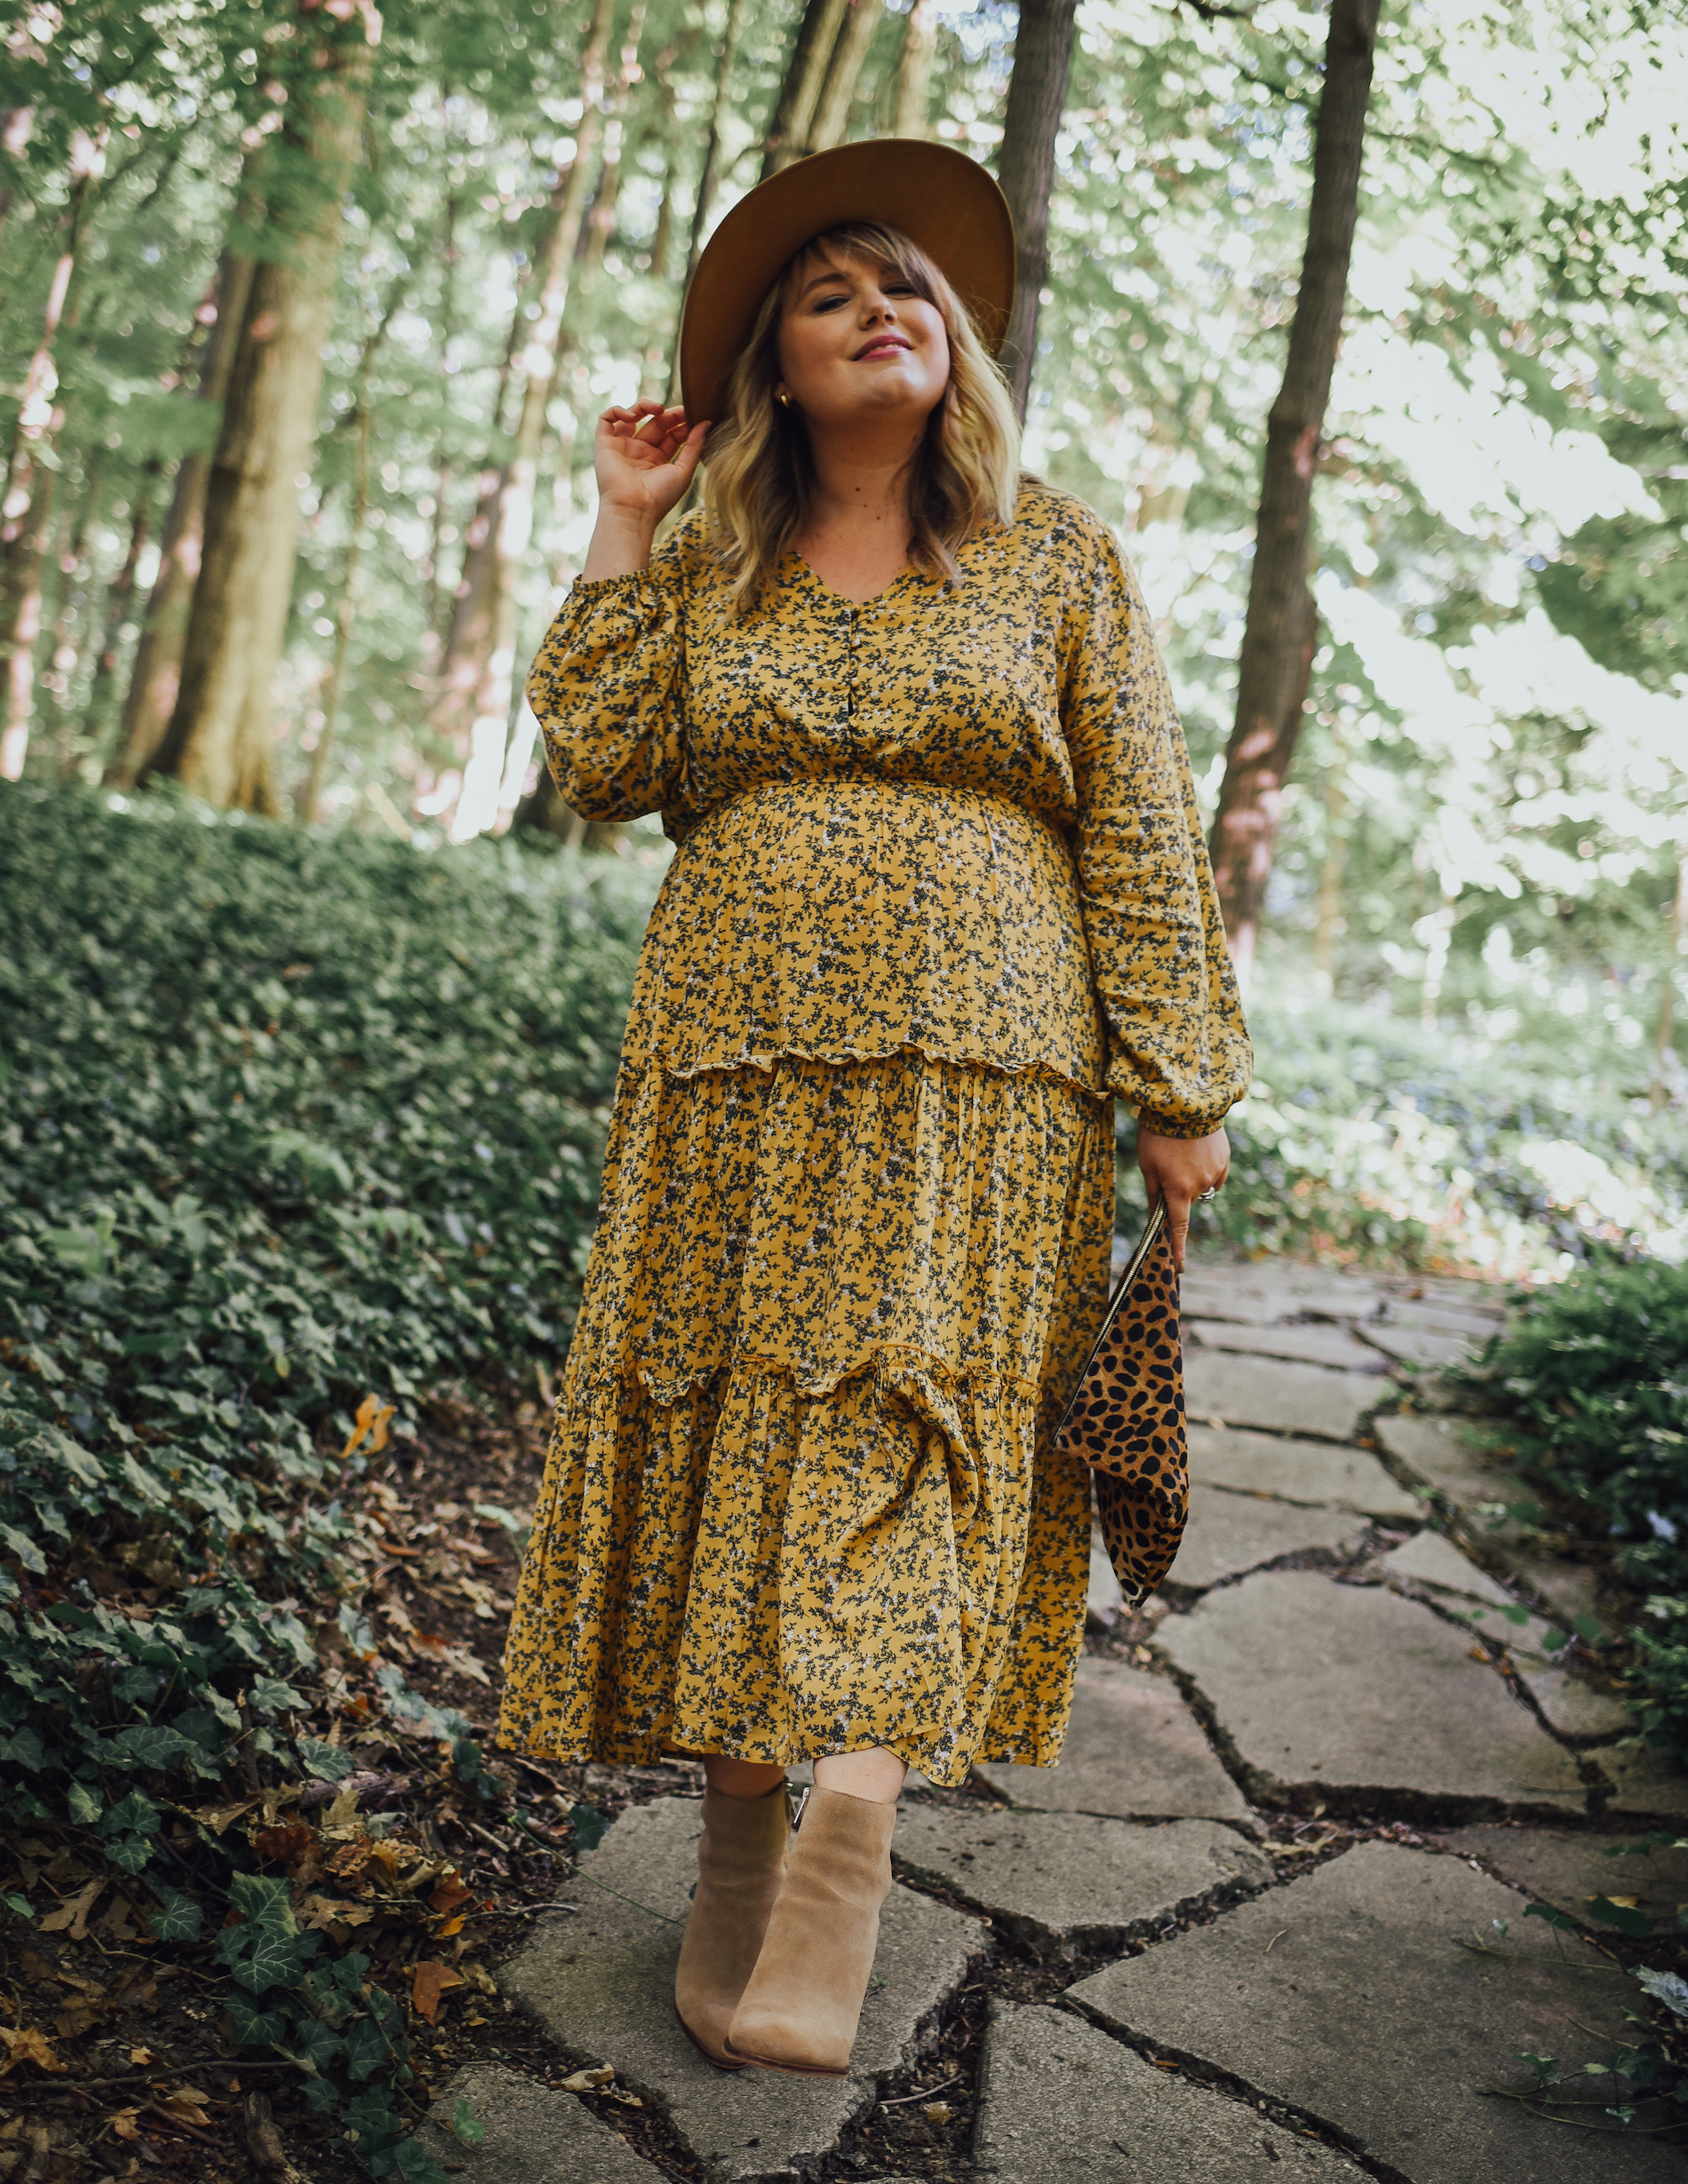 In todays post I am sharing my September Favorites with Chic Soul! Fall is really taking hold and Chic Soul has the perfect bohemian pieces!